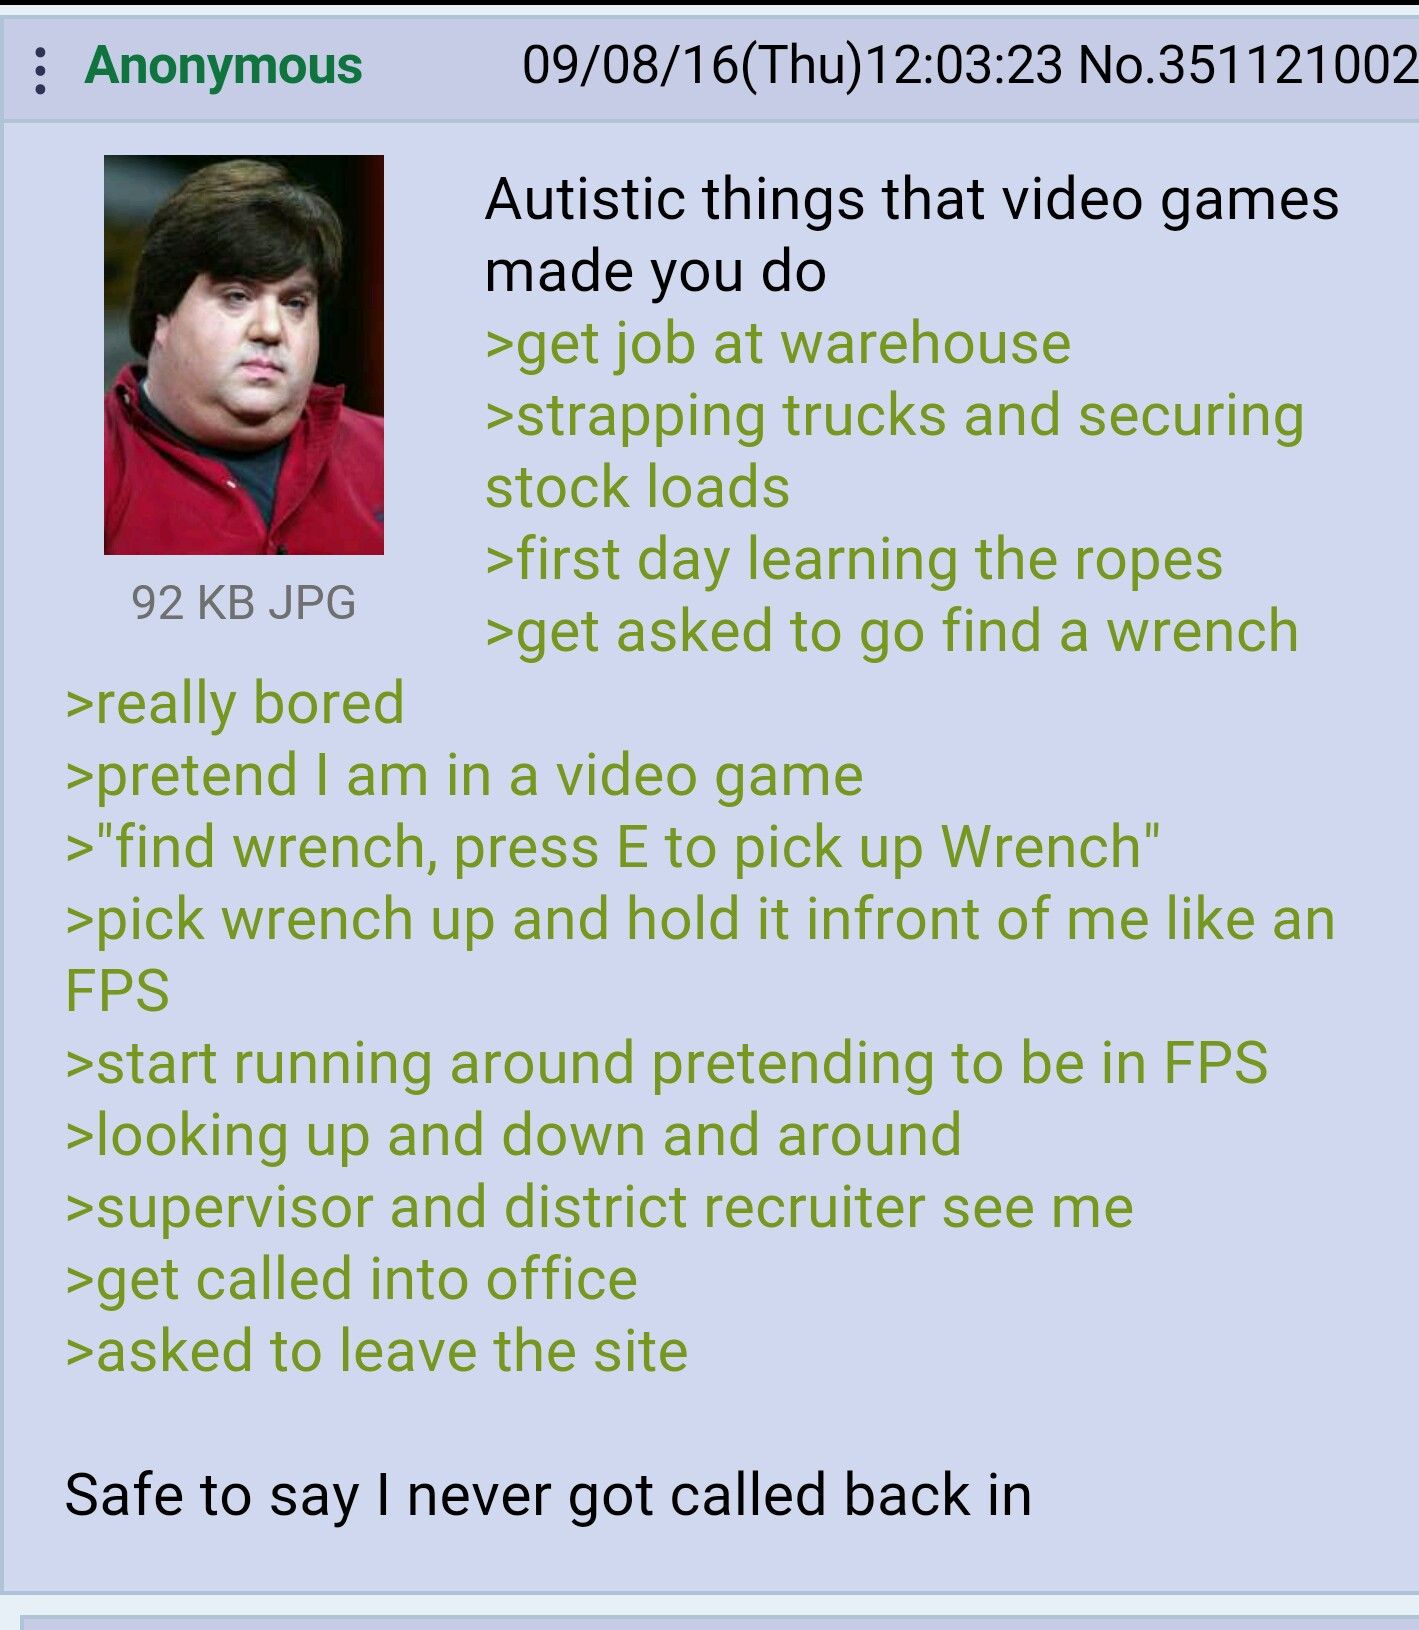 /v/ is autistic.